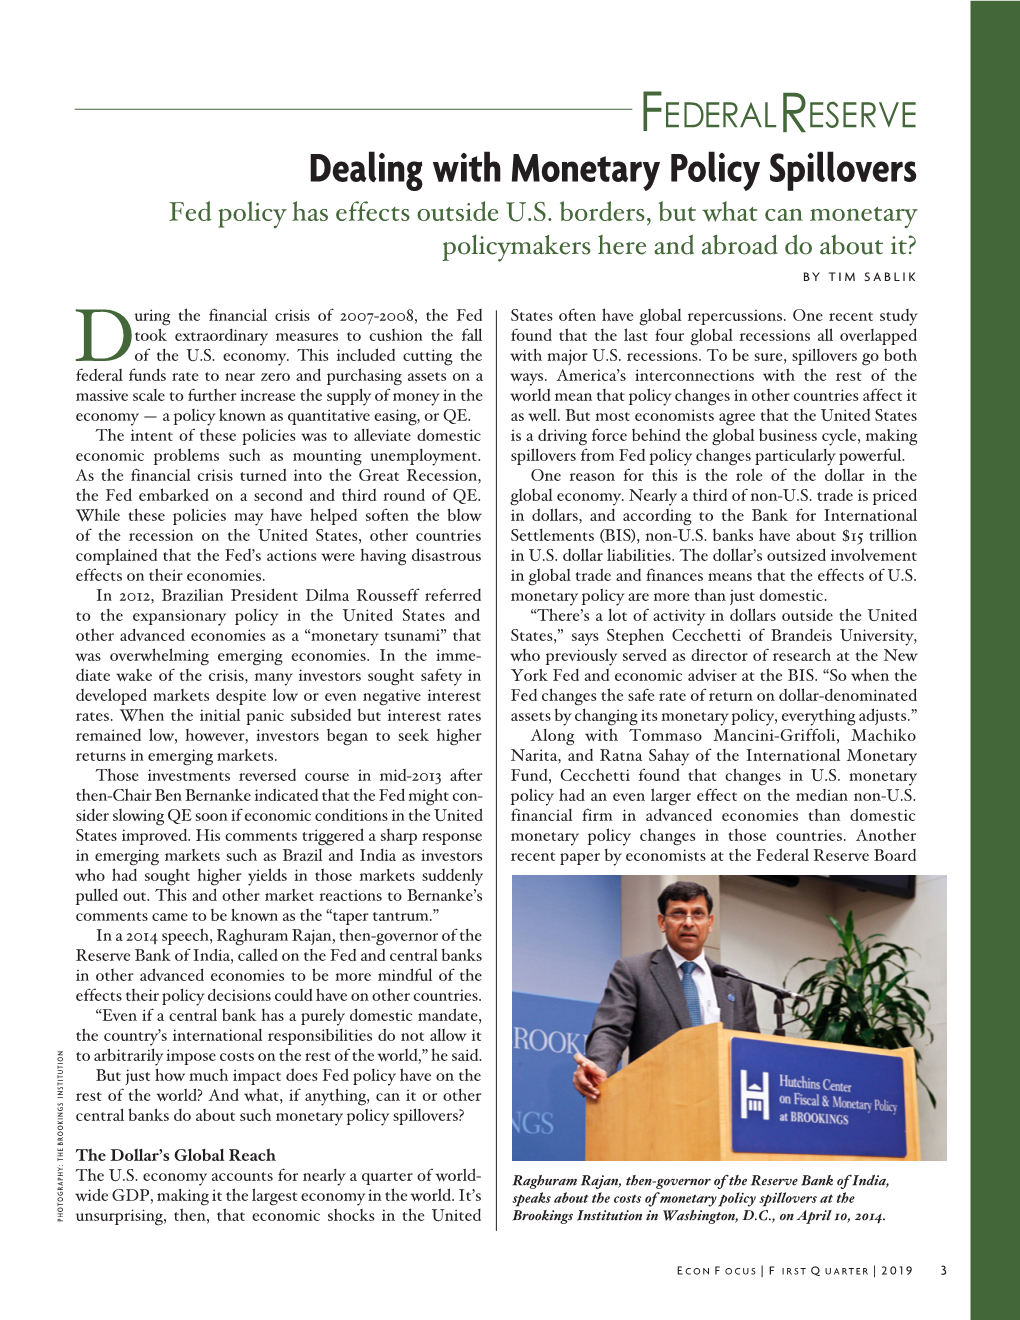 Dealing with Monetary Policy Spillovers Fed Policy Has Effects Outside U.S